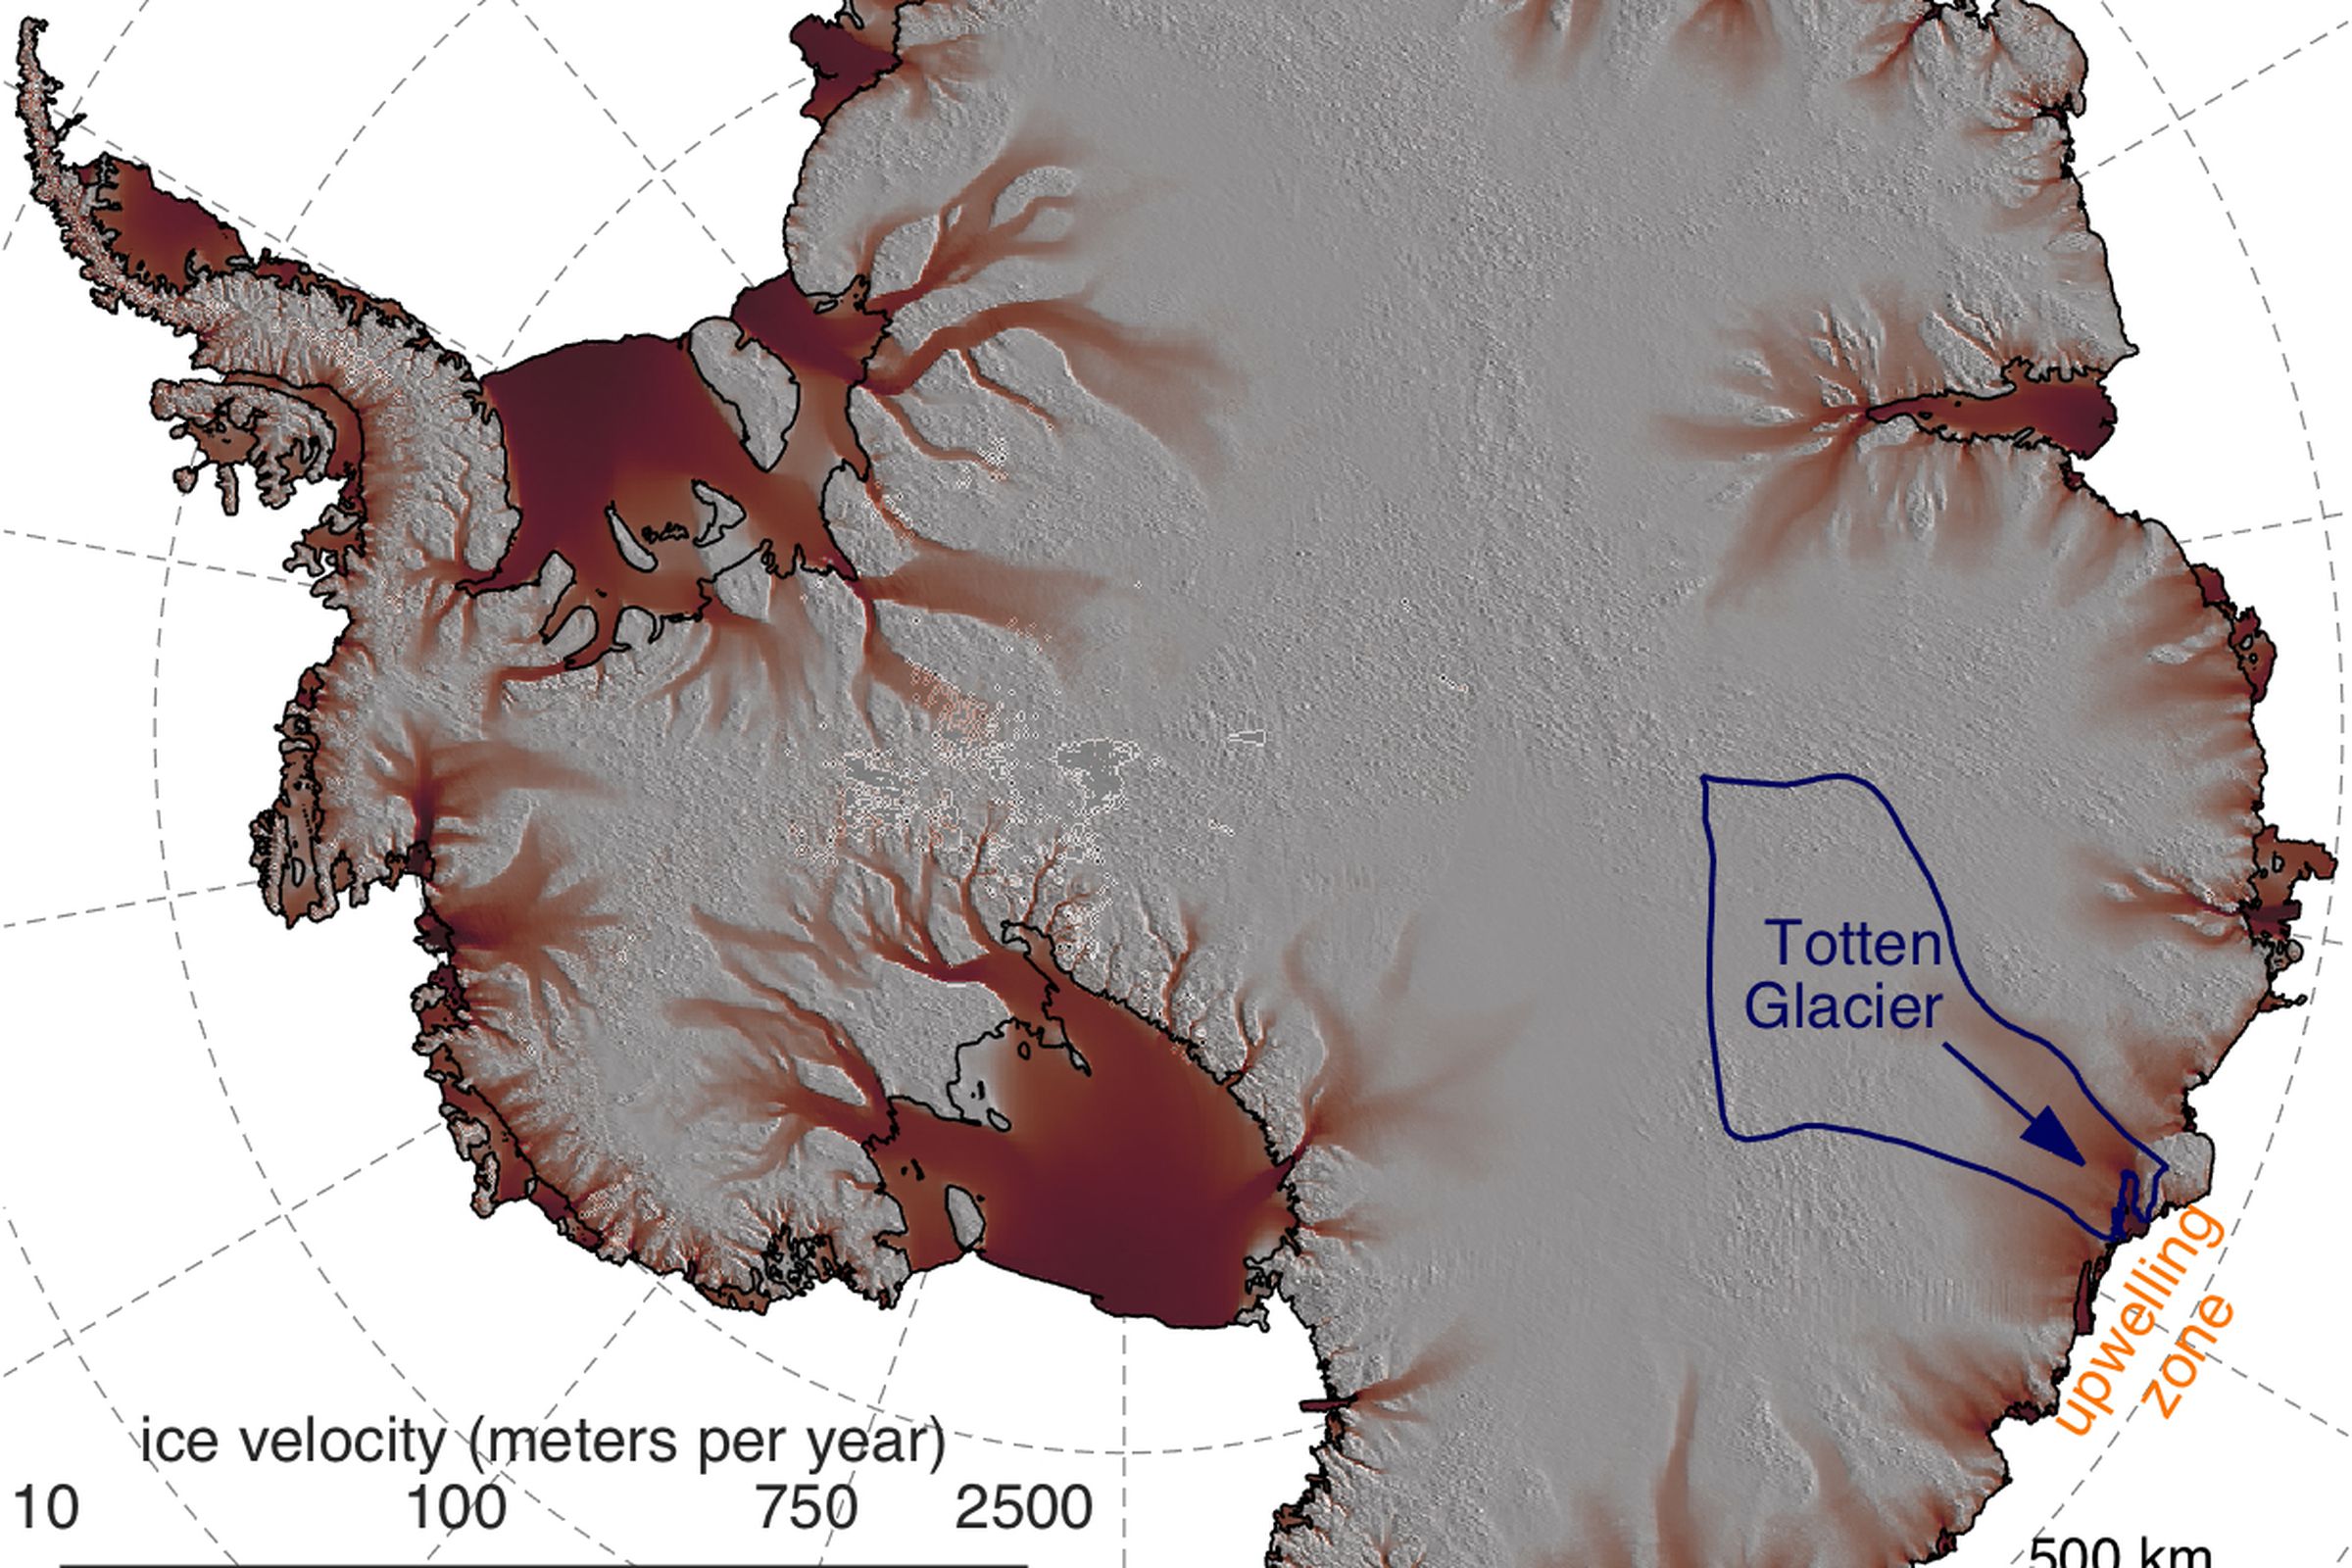 A map of Antarctica shows where Totten Glacier is.